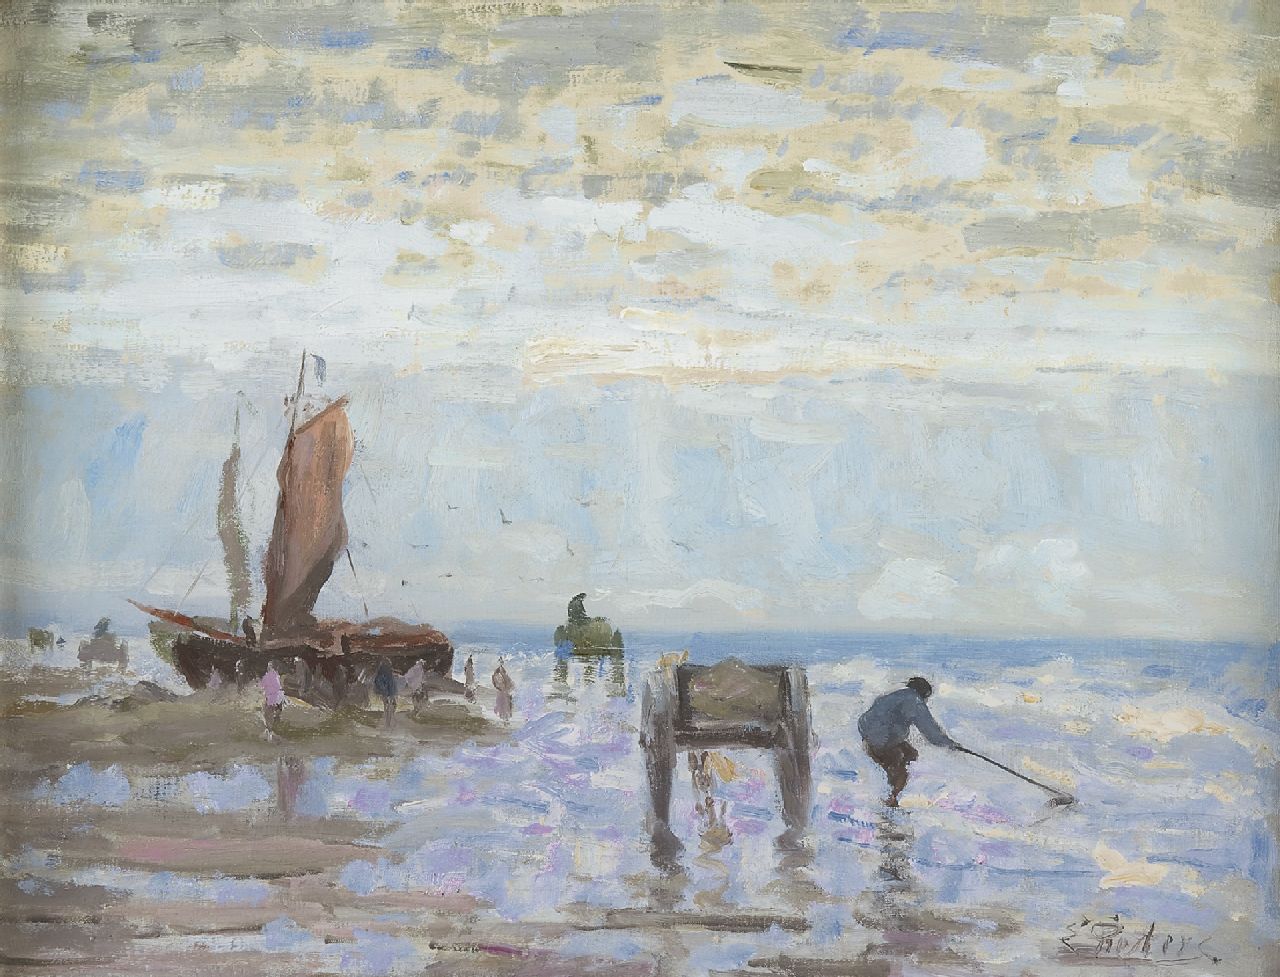 Pieters E.  | Evert Pieters, Shell fishers, Katwijk, oil on canvas 37.4 x 49.5 cm, signed l.r. and painted between 1900-1910.